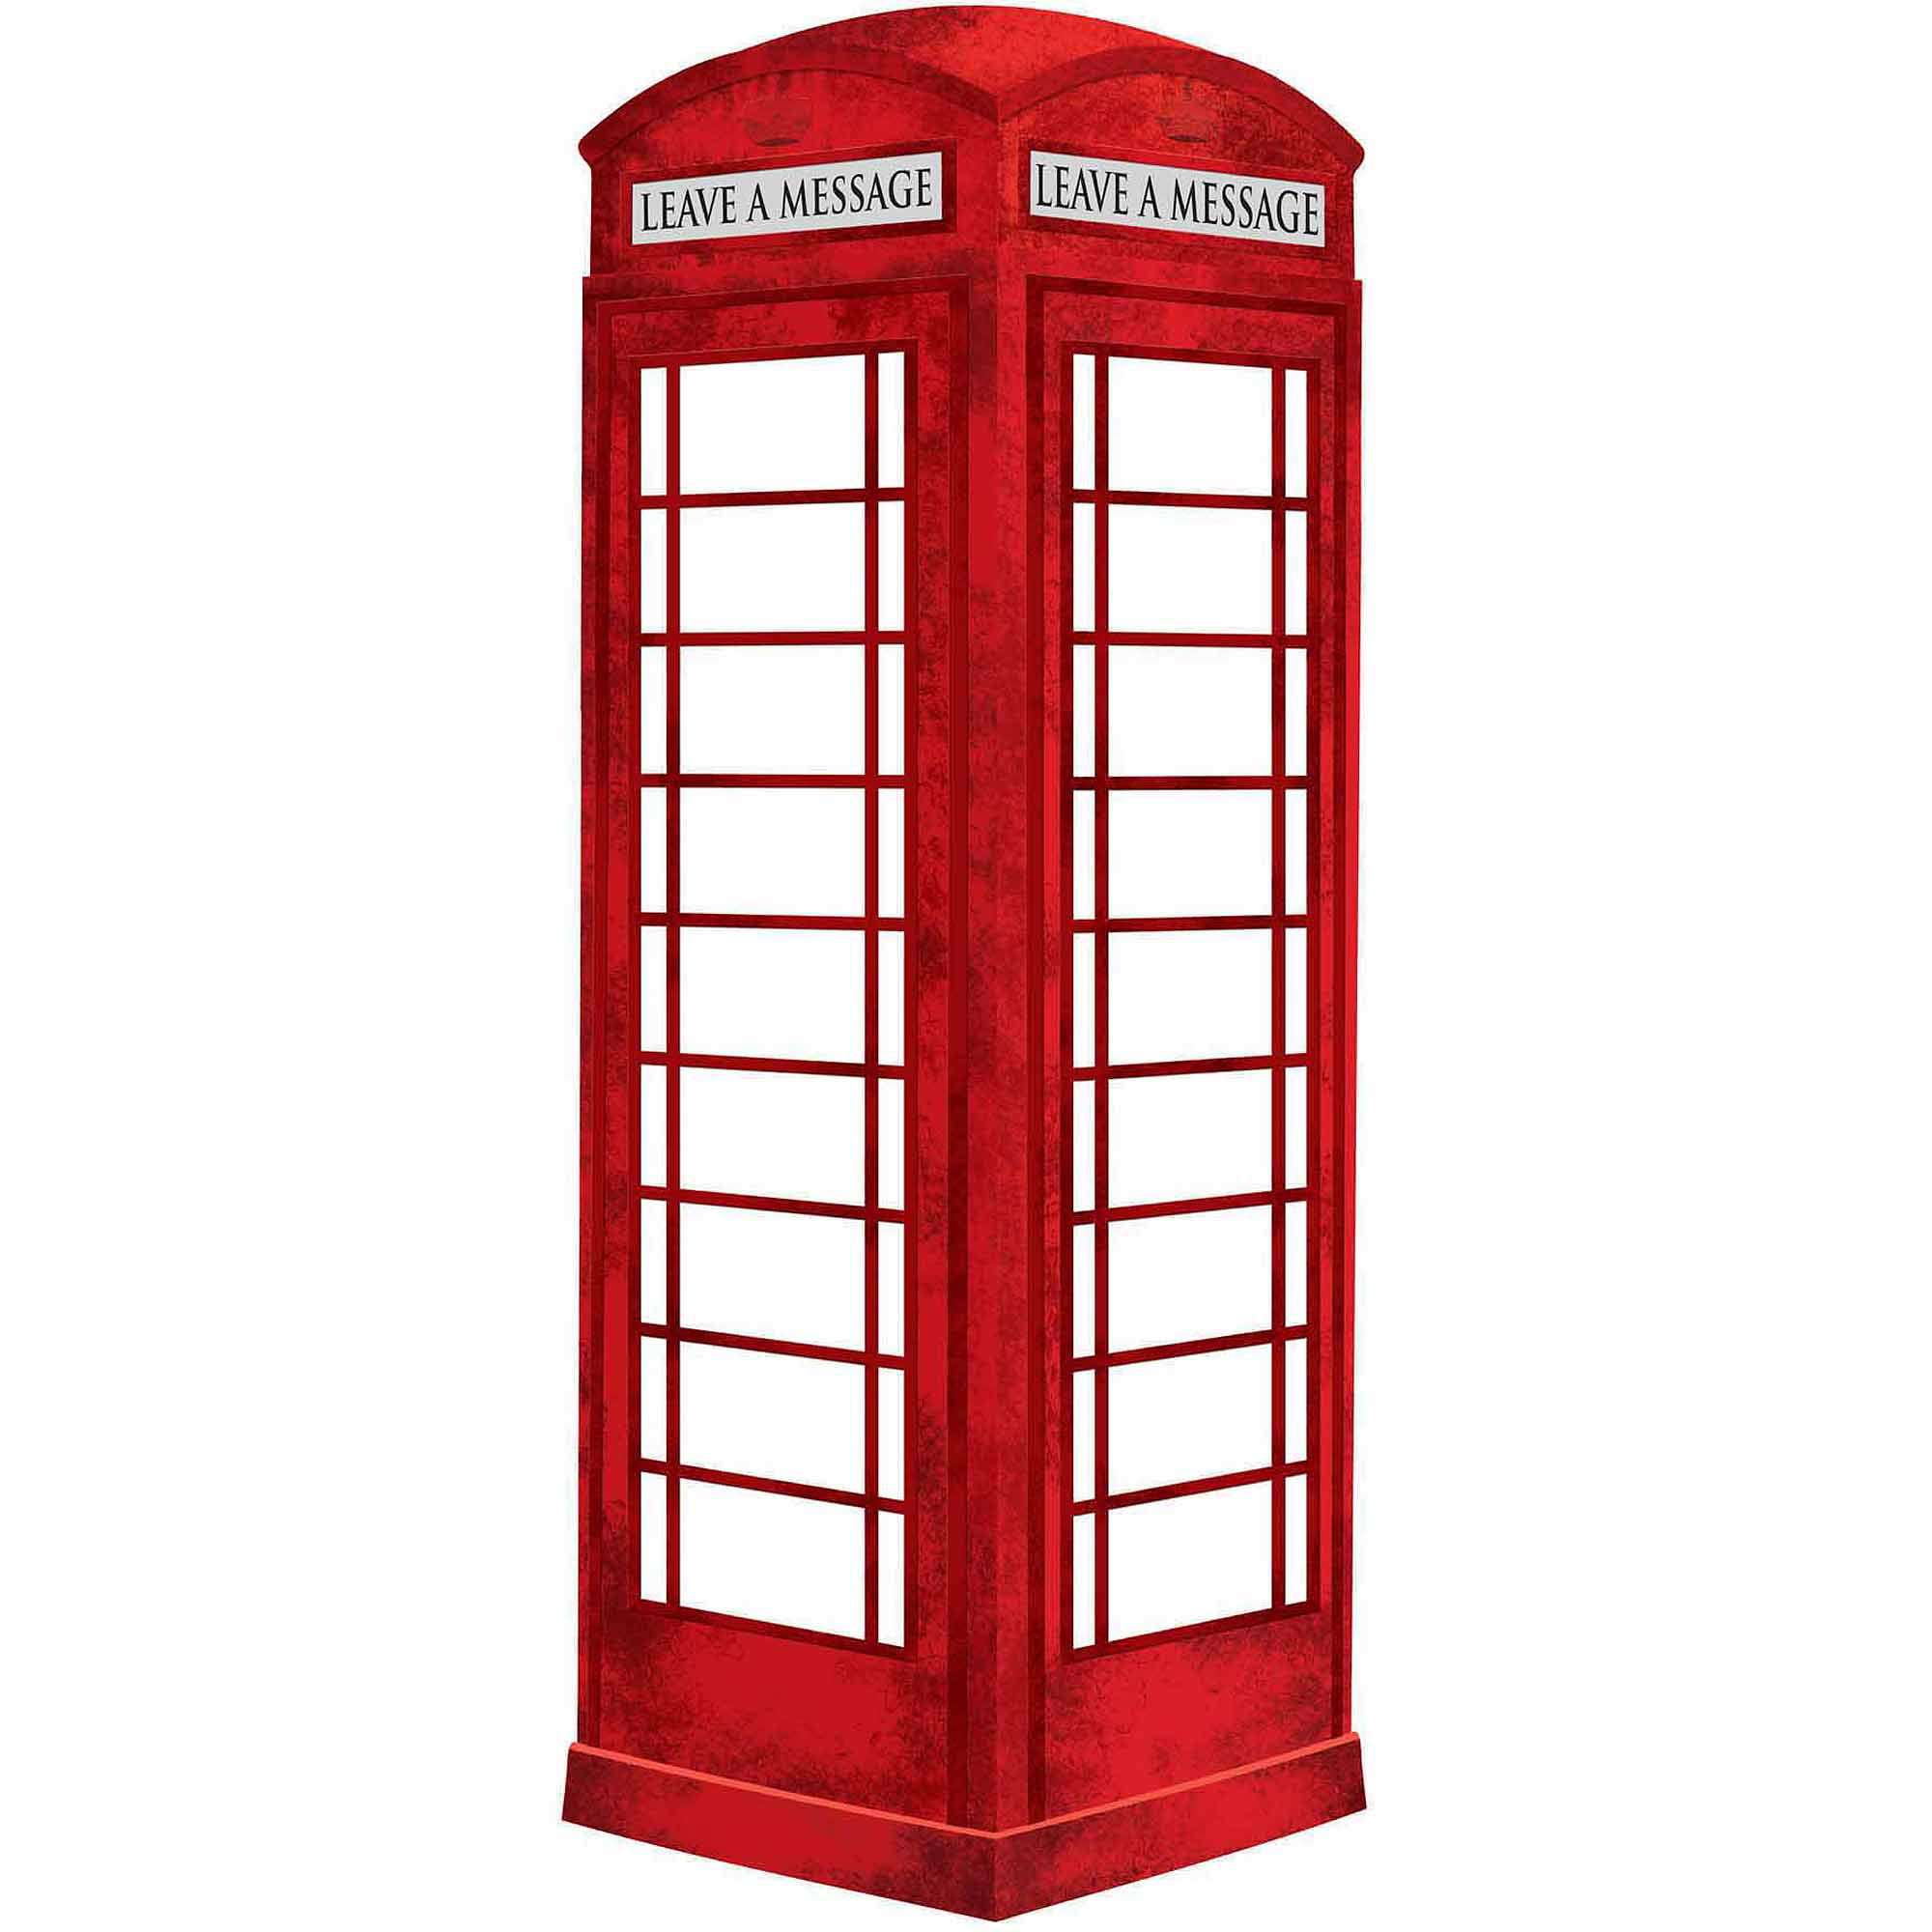 WallPops Dry Erase London Phone Booth Message Board Decal